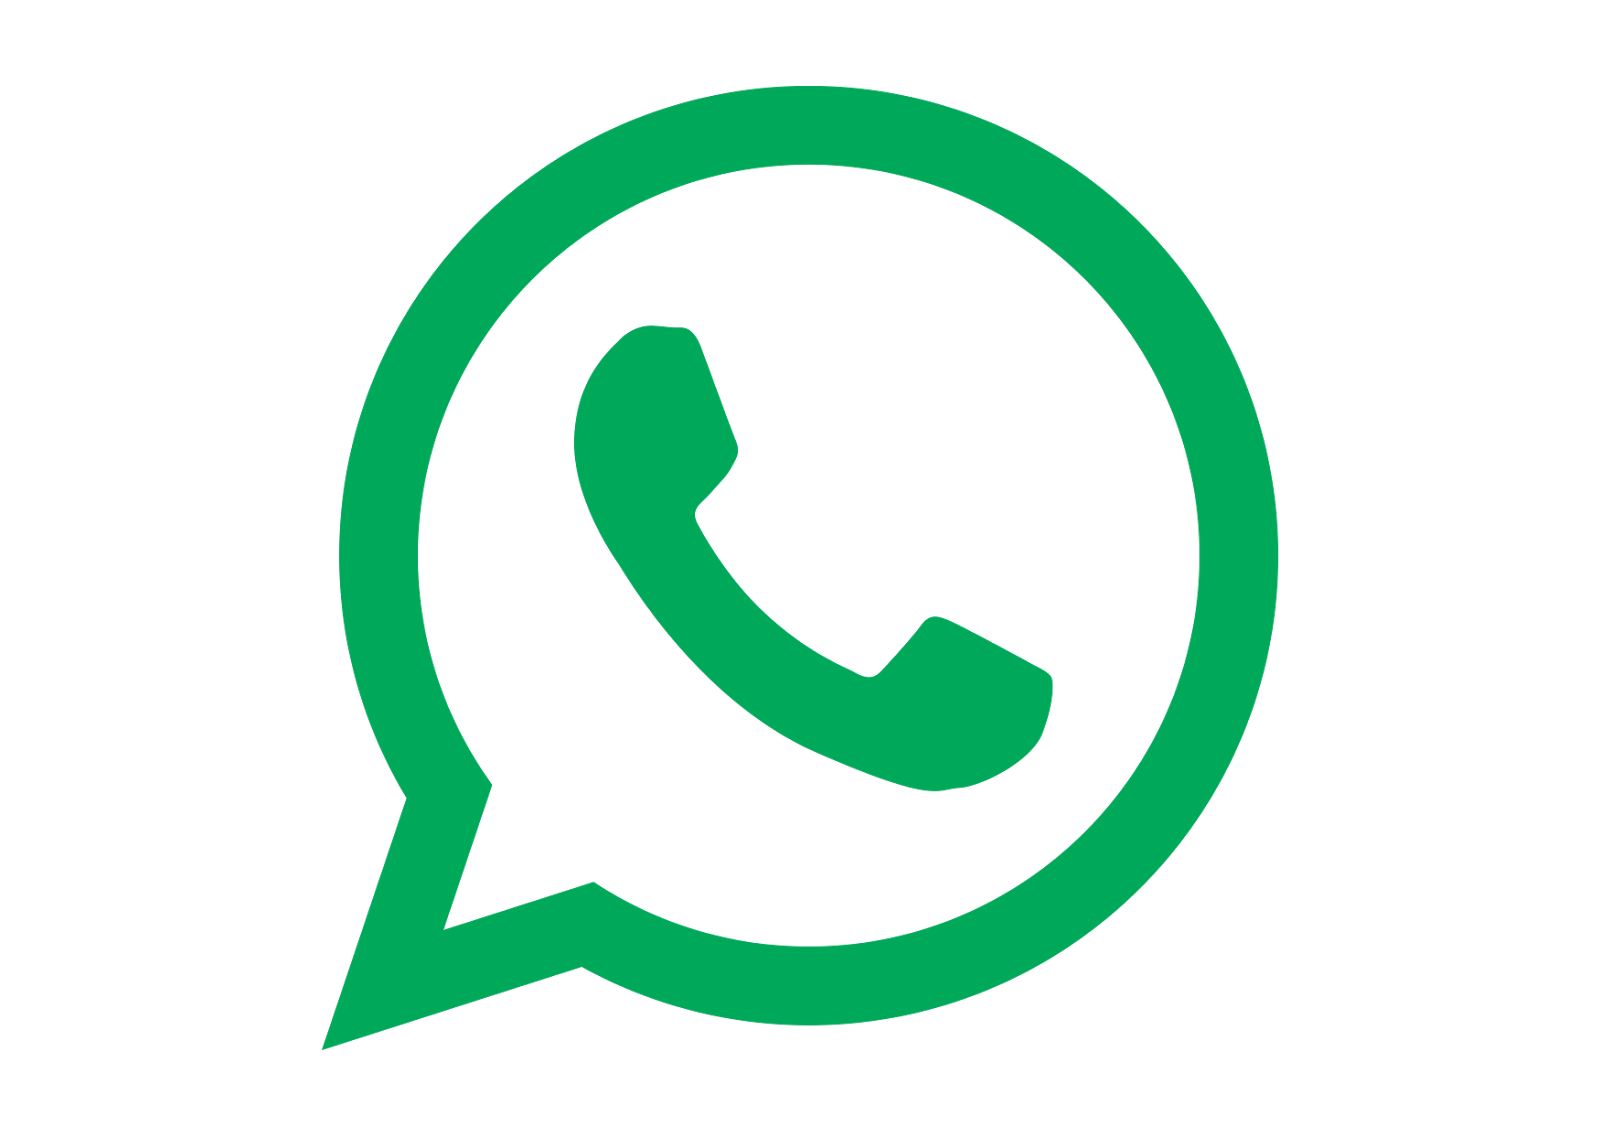 Whatsapp Logo Png Images Free Download By Freepnglogos Com